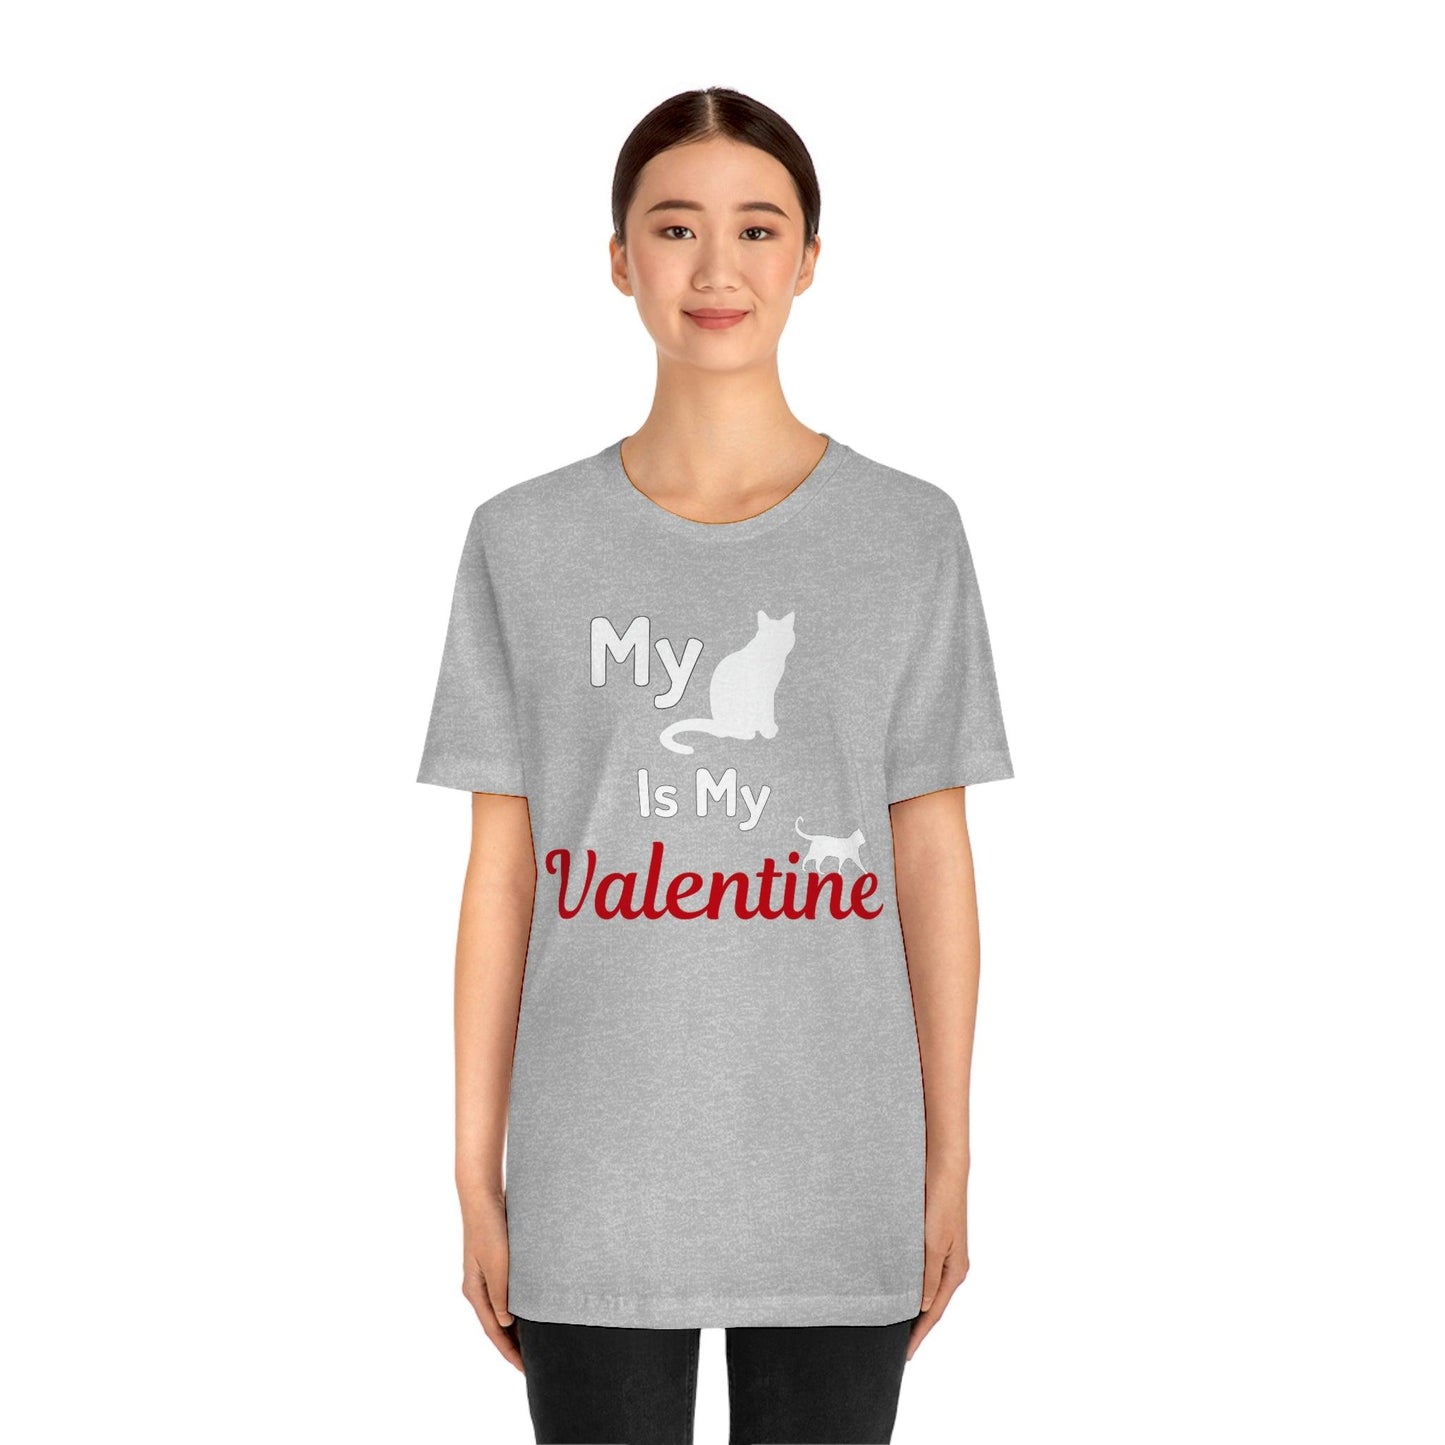 My Cat is My Valentine, Pet lover Valentine shirt - Cute cat lover shirt - gift for cat lovers